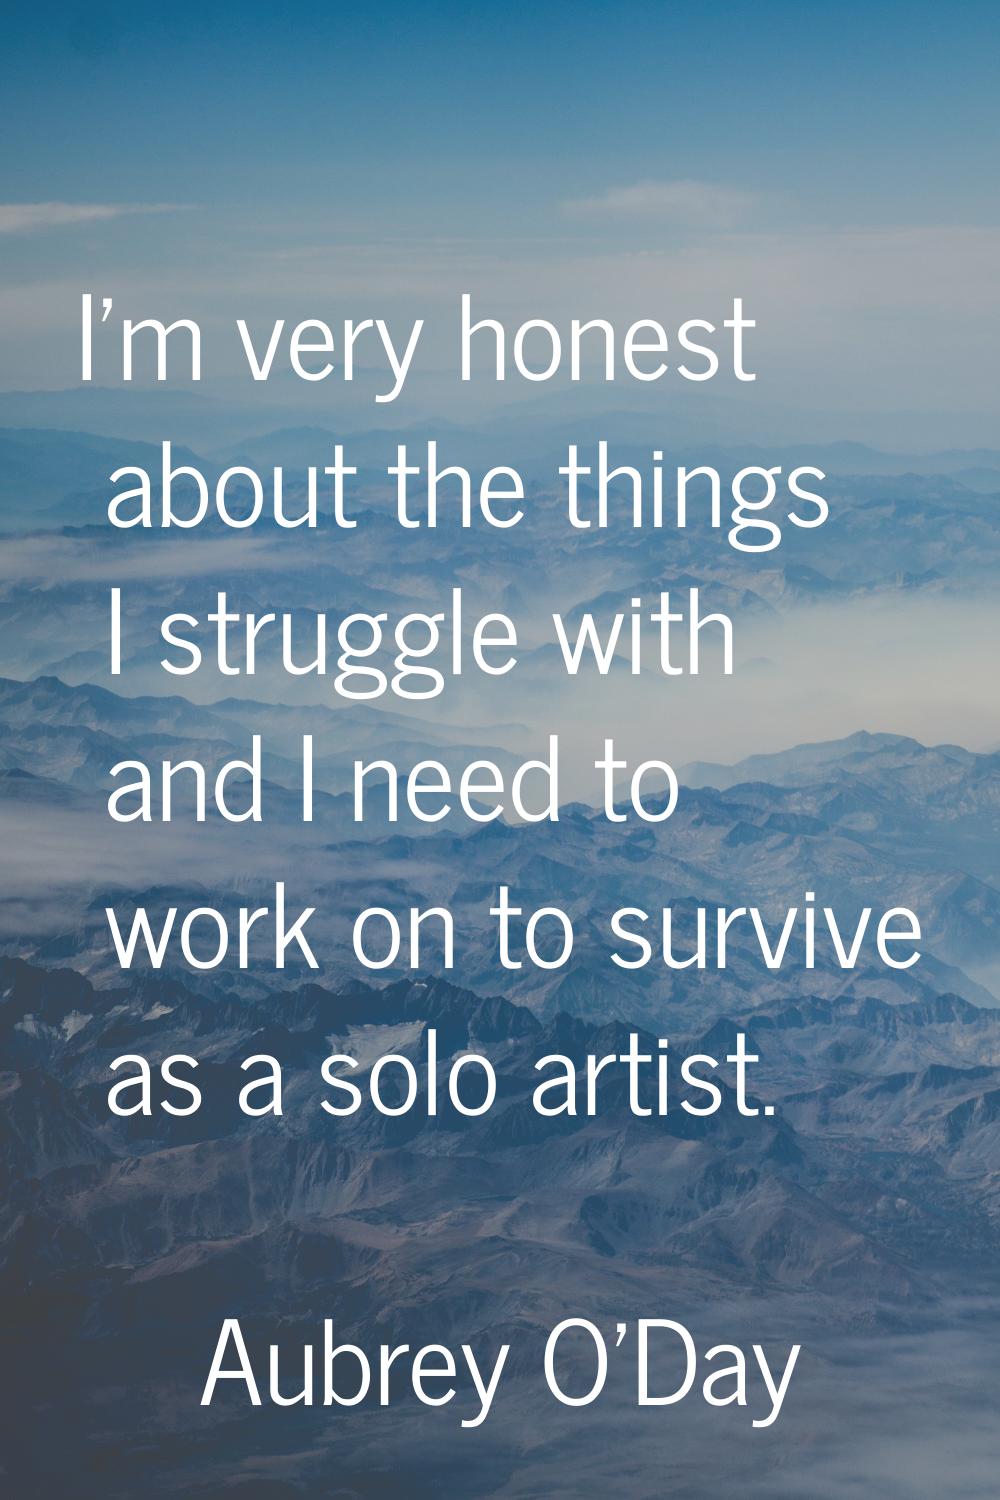 I'm very honest about the things I struggle with and I need to work on to survive as a solo artist.